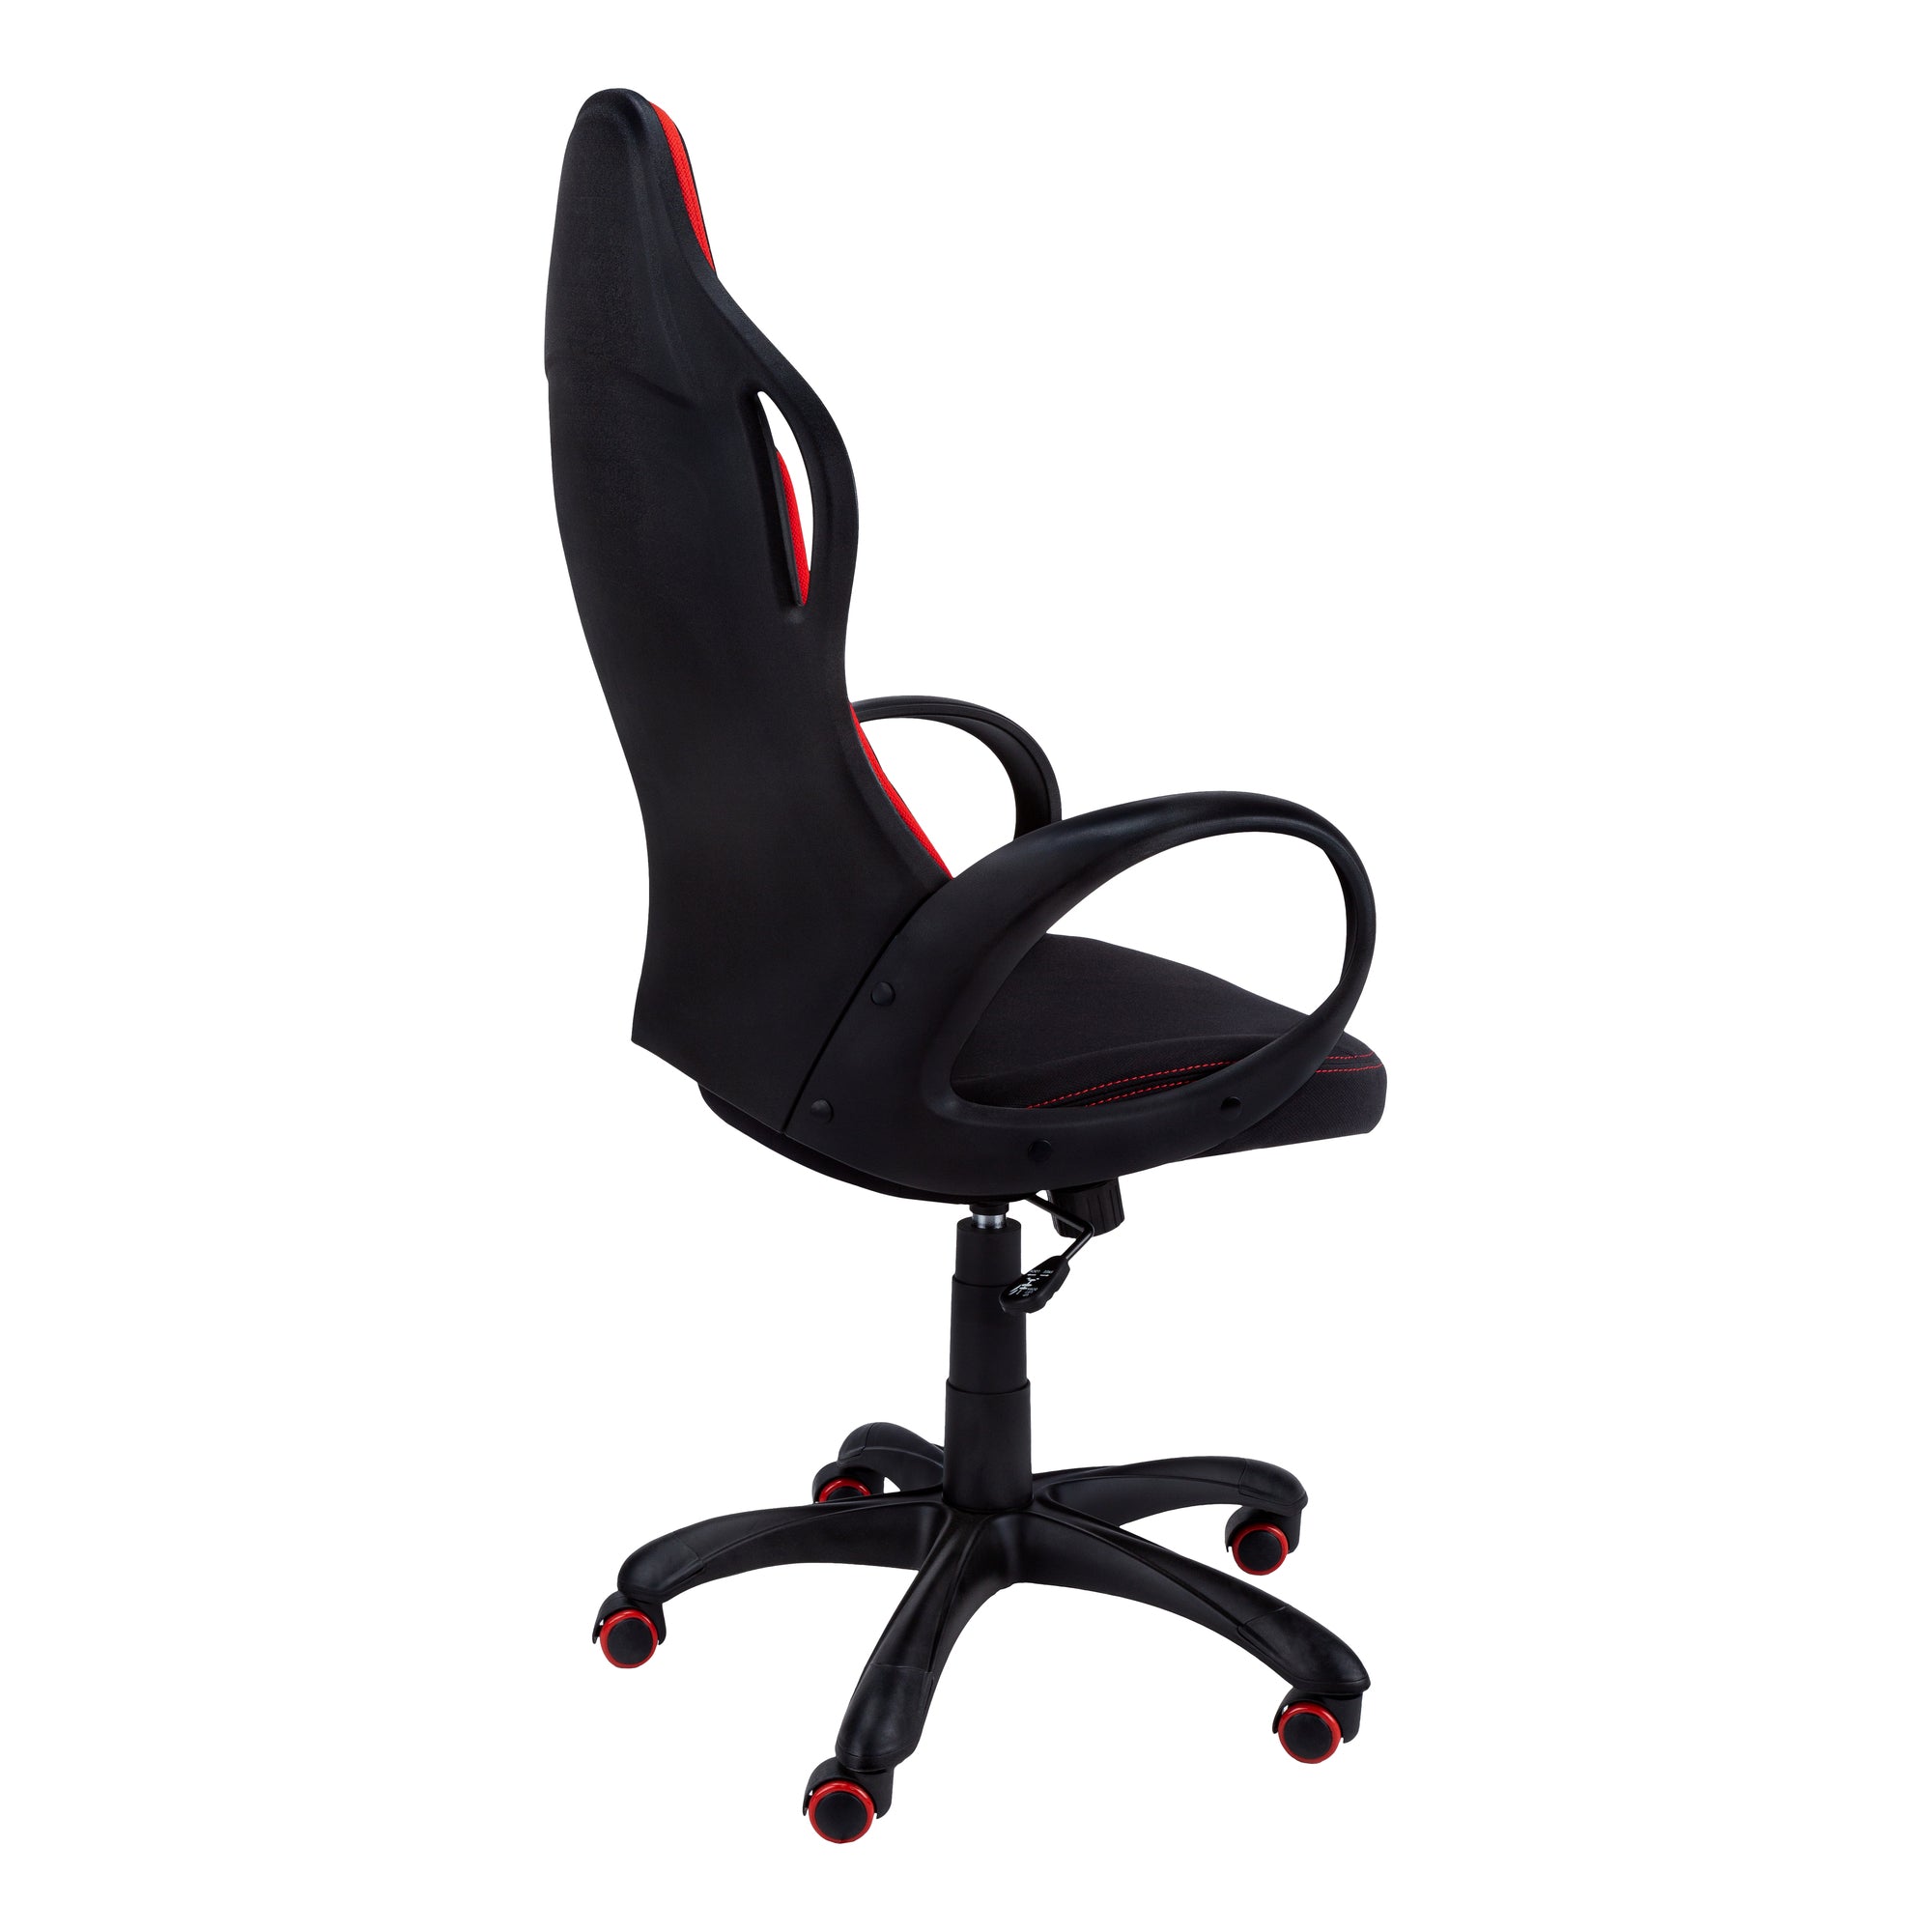 MN-737259    Office Chair, Adjustable Height, Swivel, Ergonomic, Armrests, Computer Desk, Office, Metal Base, Fabric, Black, Red, Contemporary, Modern